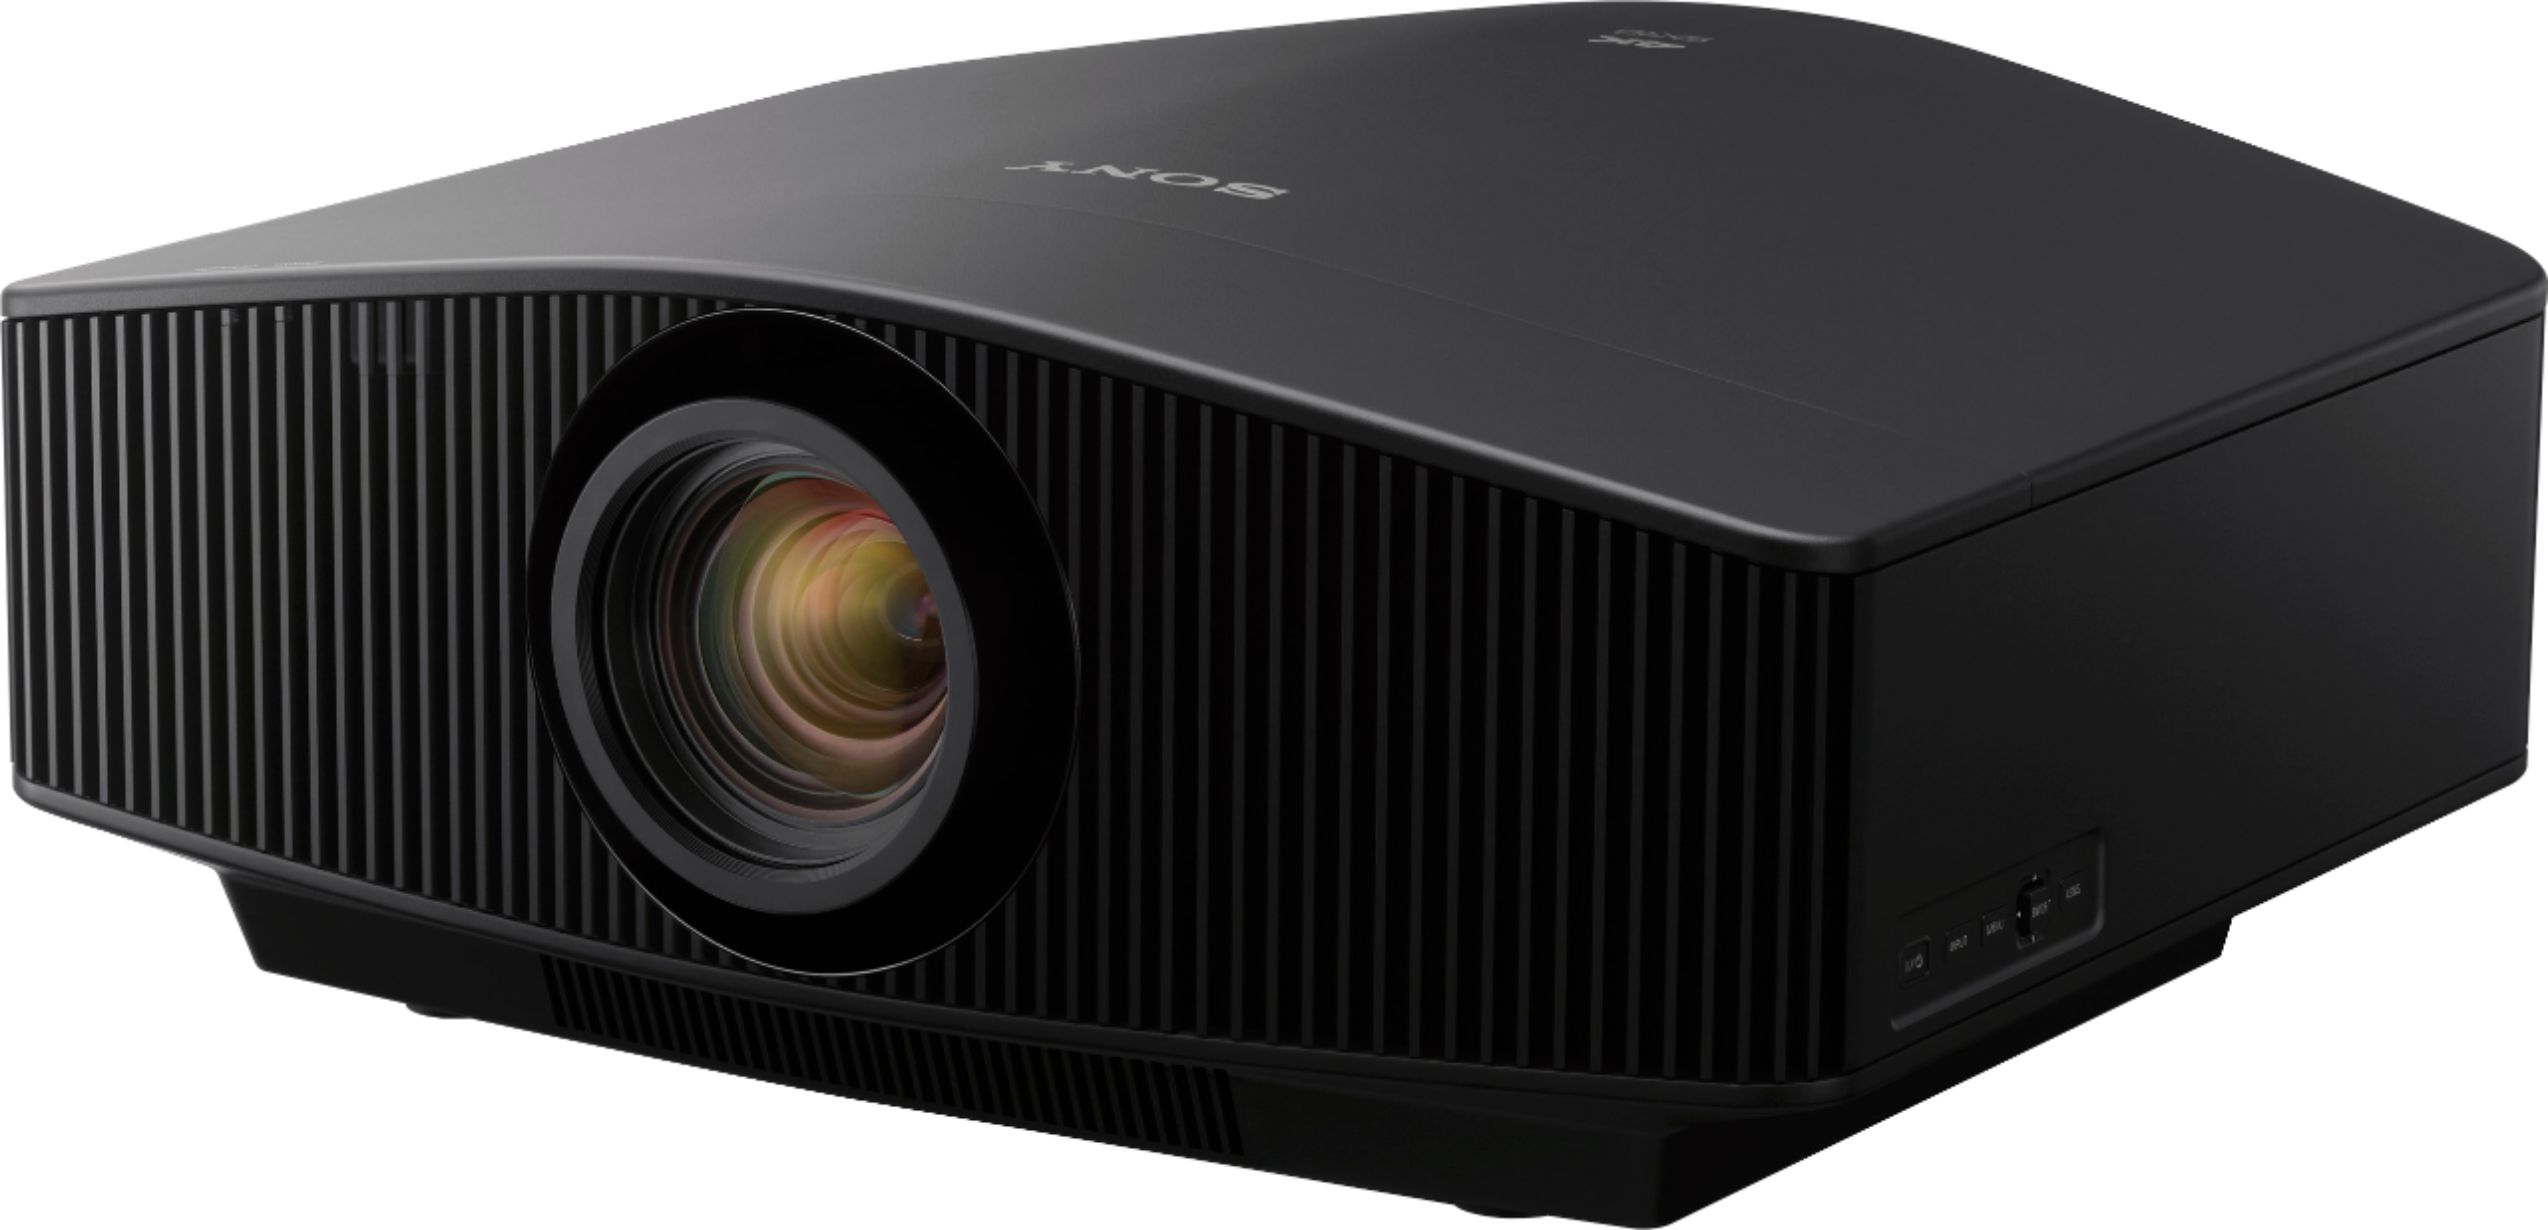 Angle View: Sony - VW1025ES 4K Laser Home Theater Projector with HDR - Black